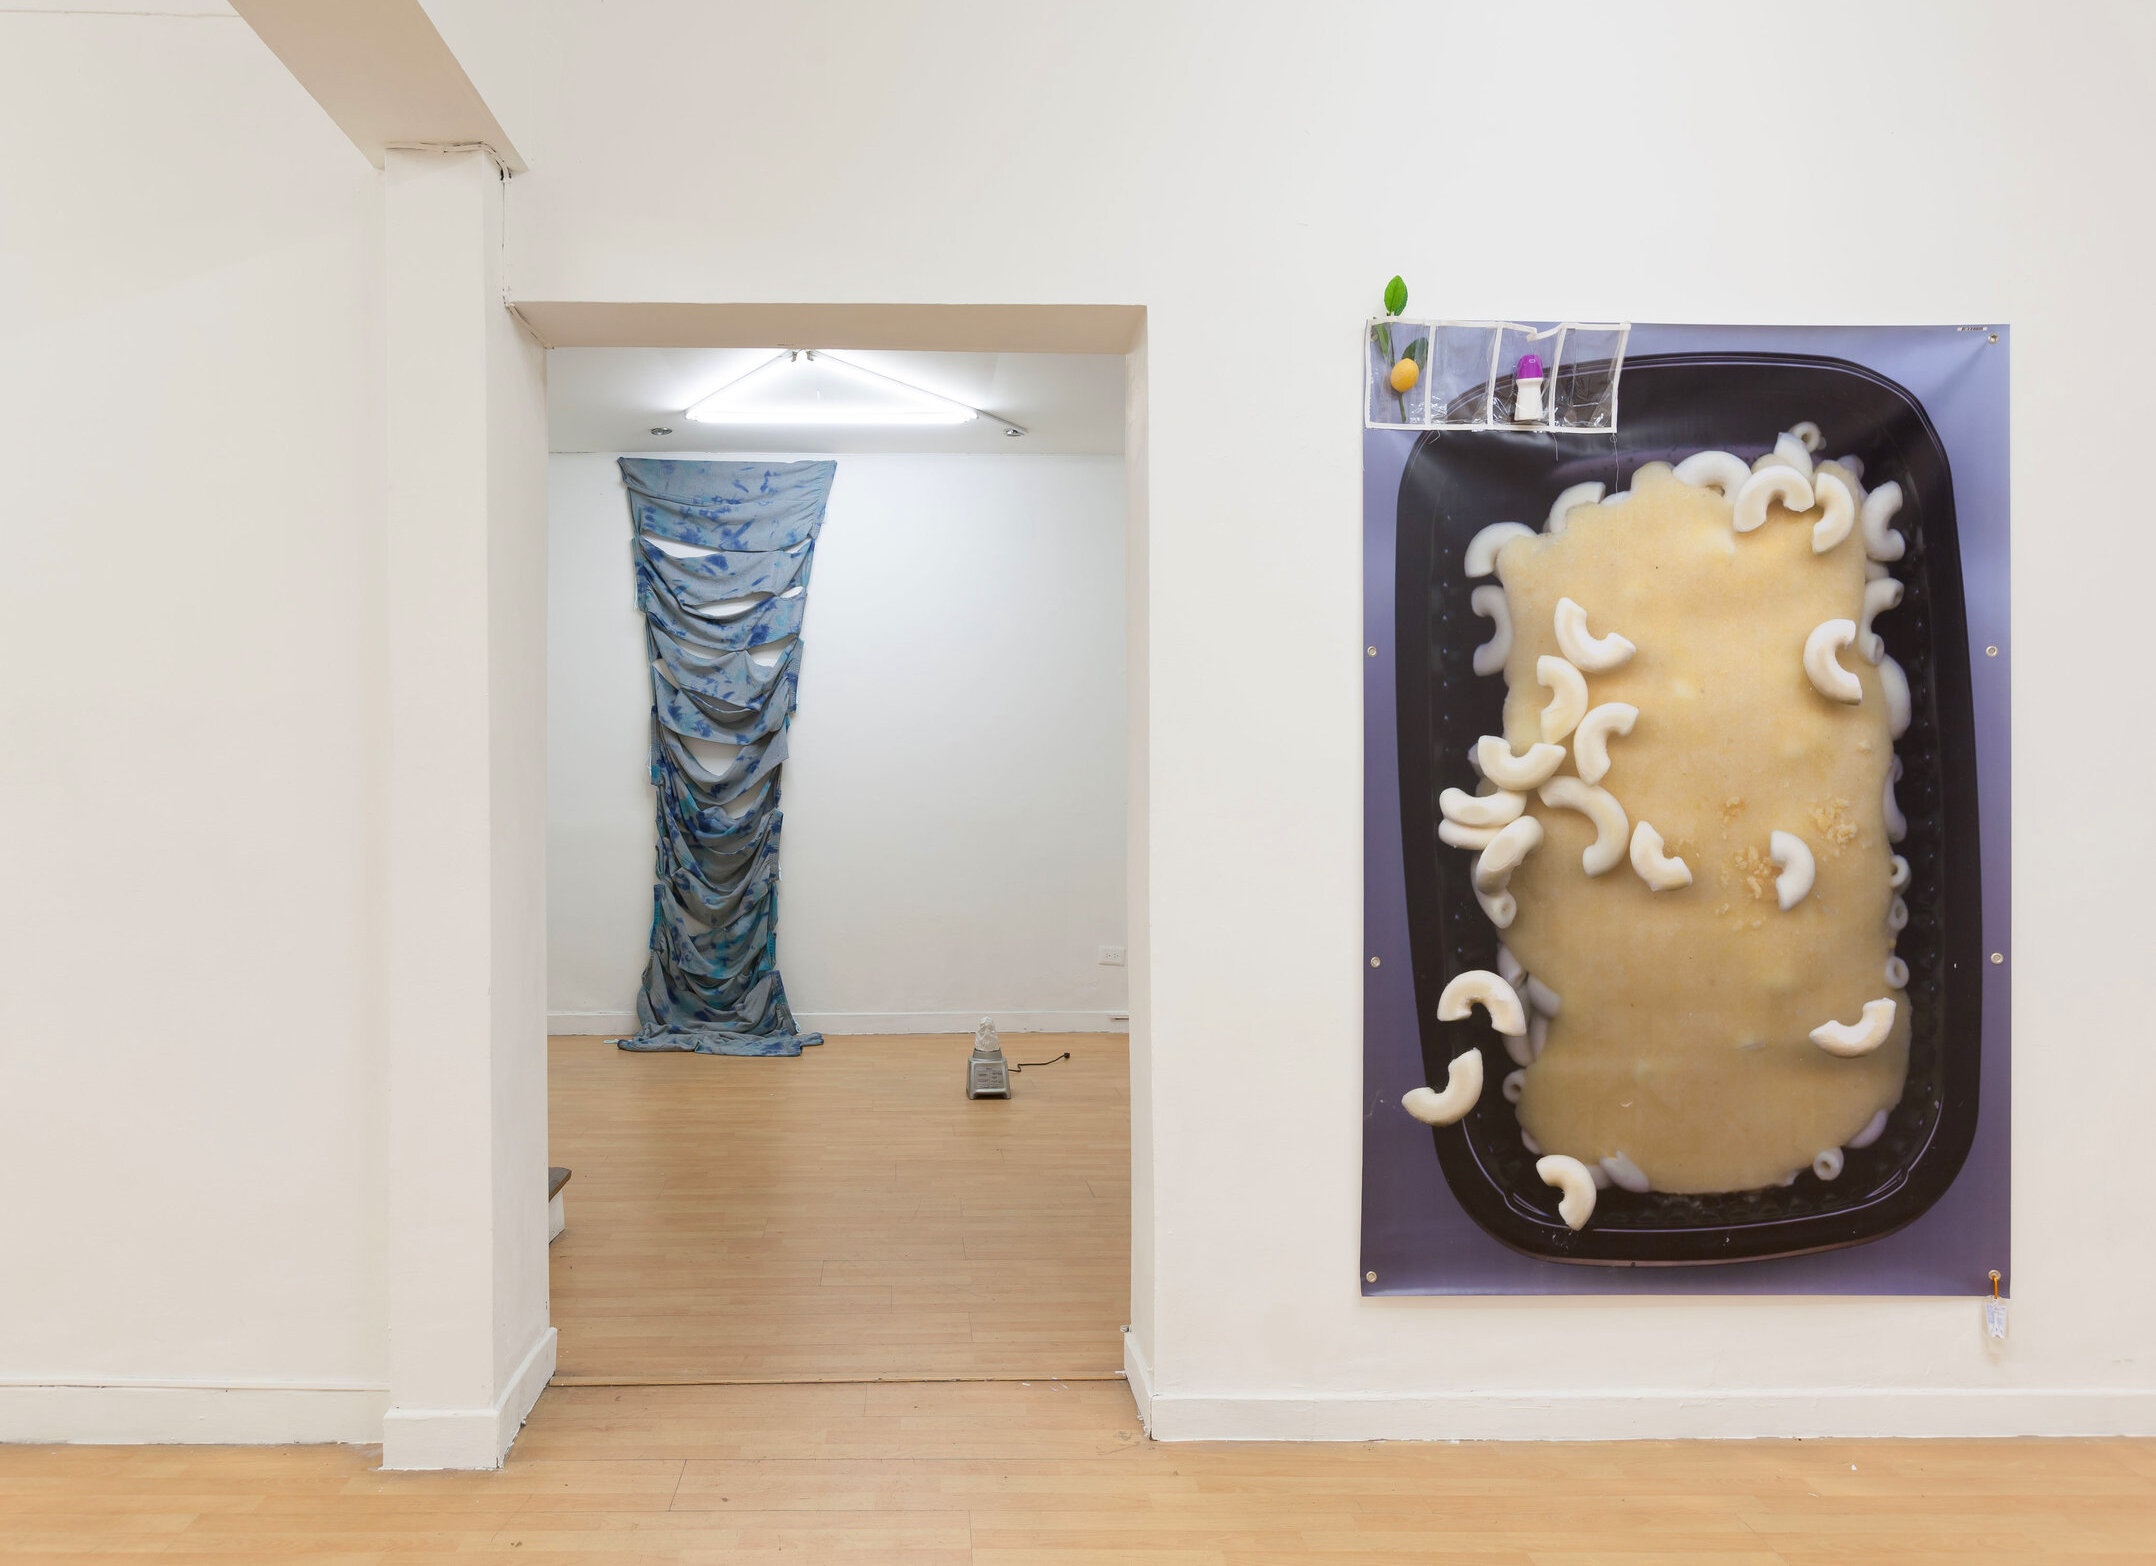 Reduced Guilt (Installation View)